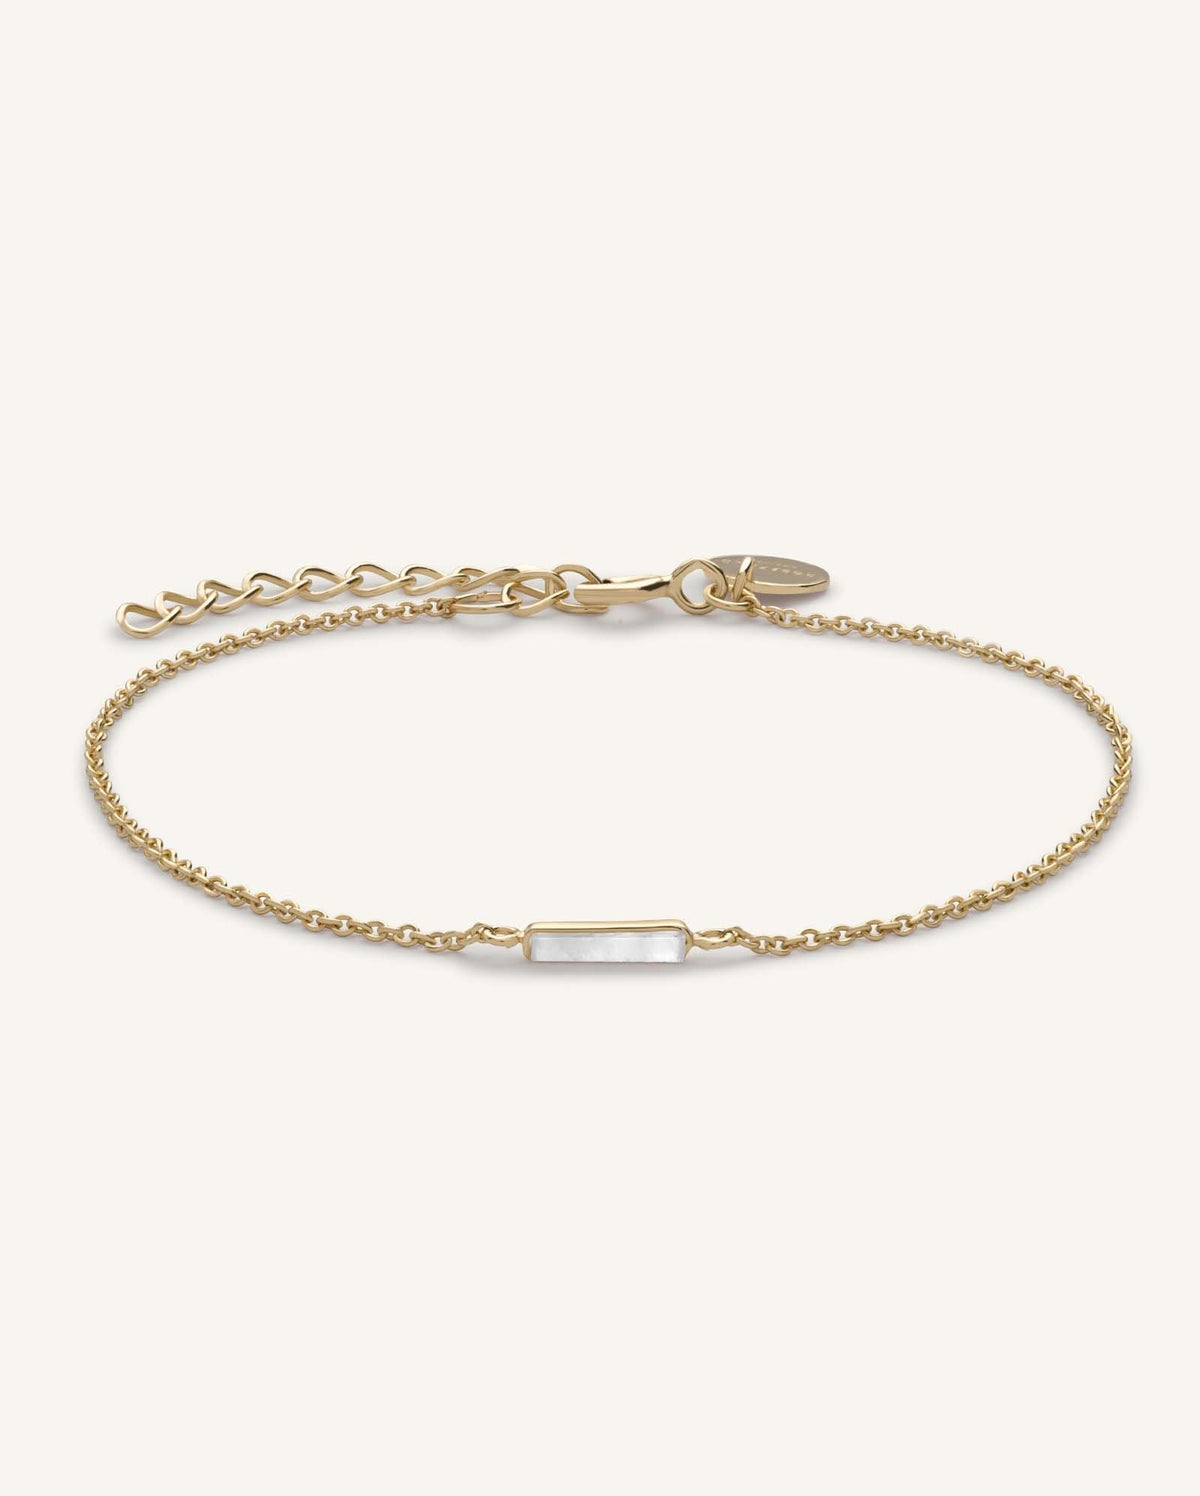 gold jewelry bracelet The Downtown Chic Rosefield, leftcolumn